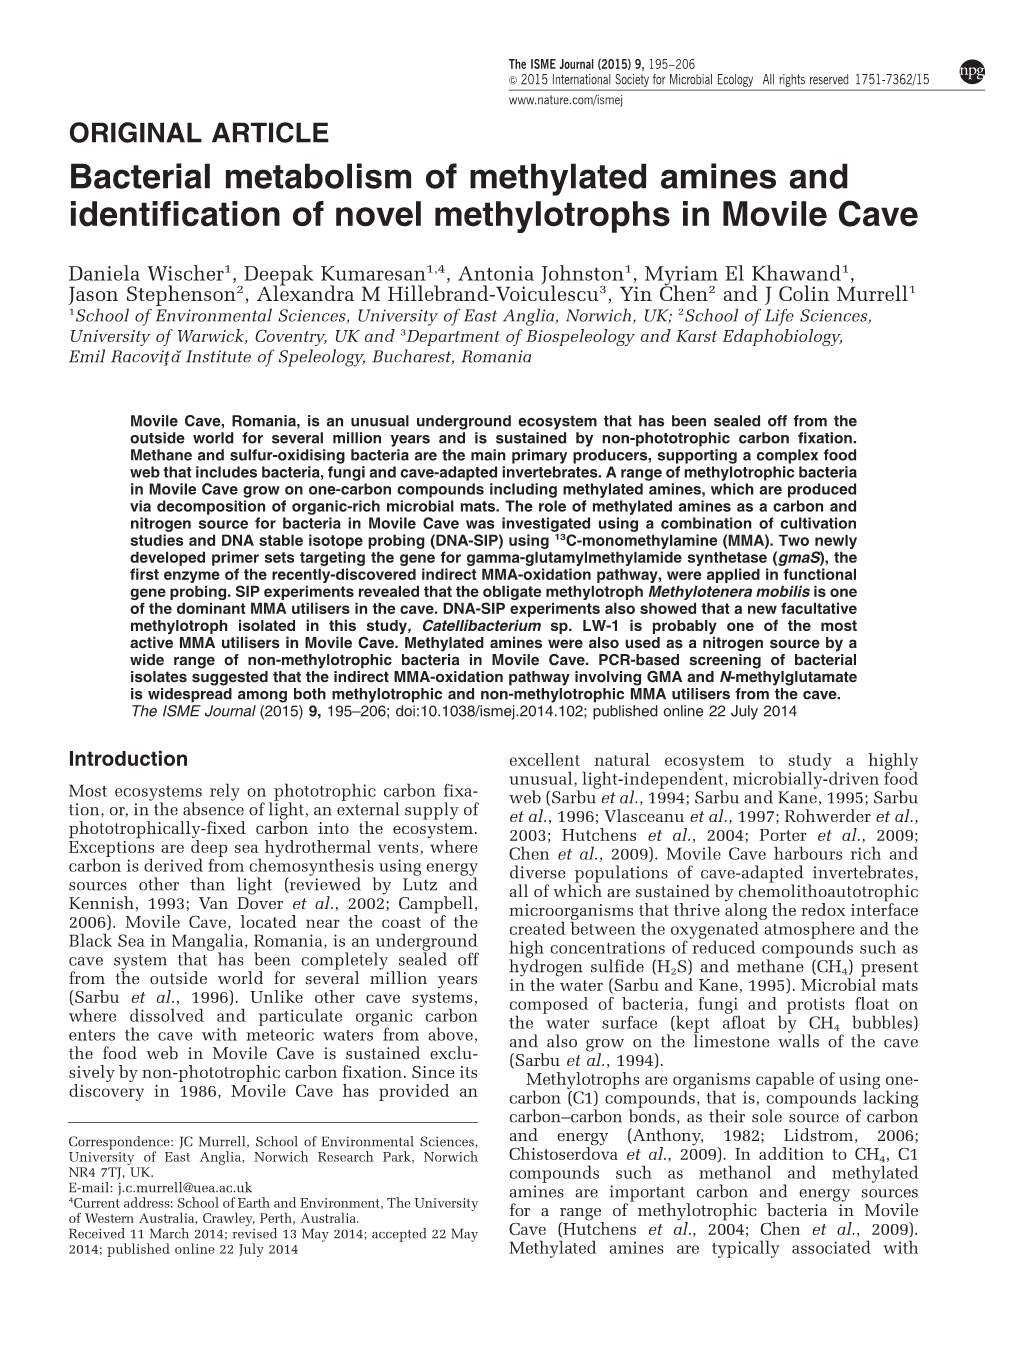 Bacterial Metabolism of Methylated Amines and Identification of Novel Methylotrophs in Movile Cave